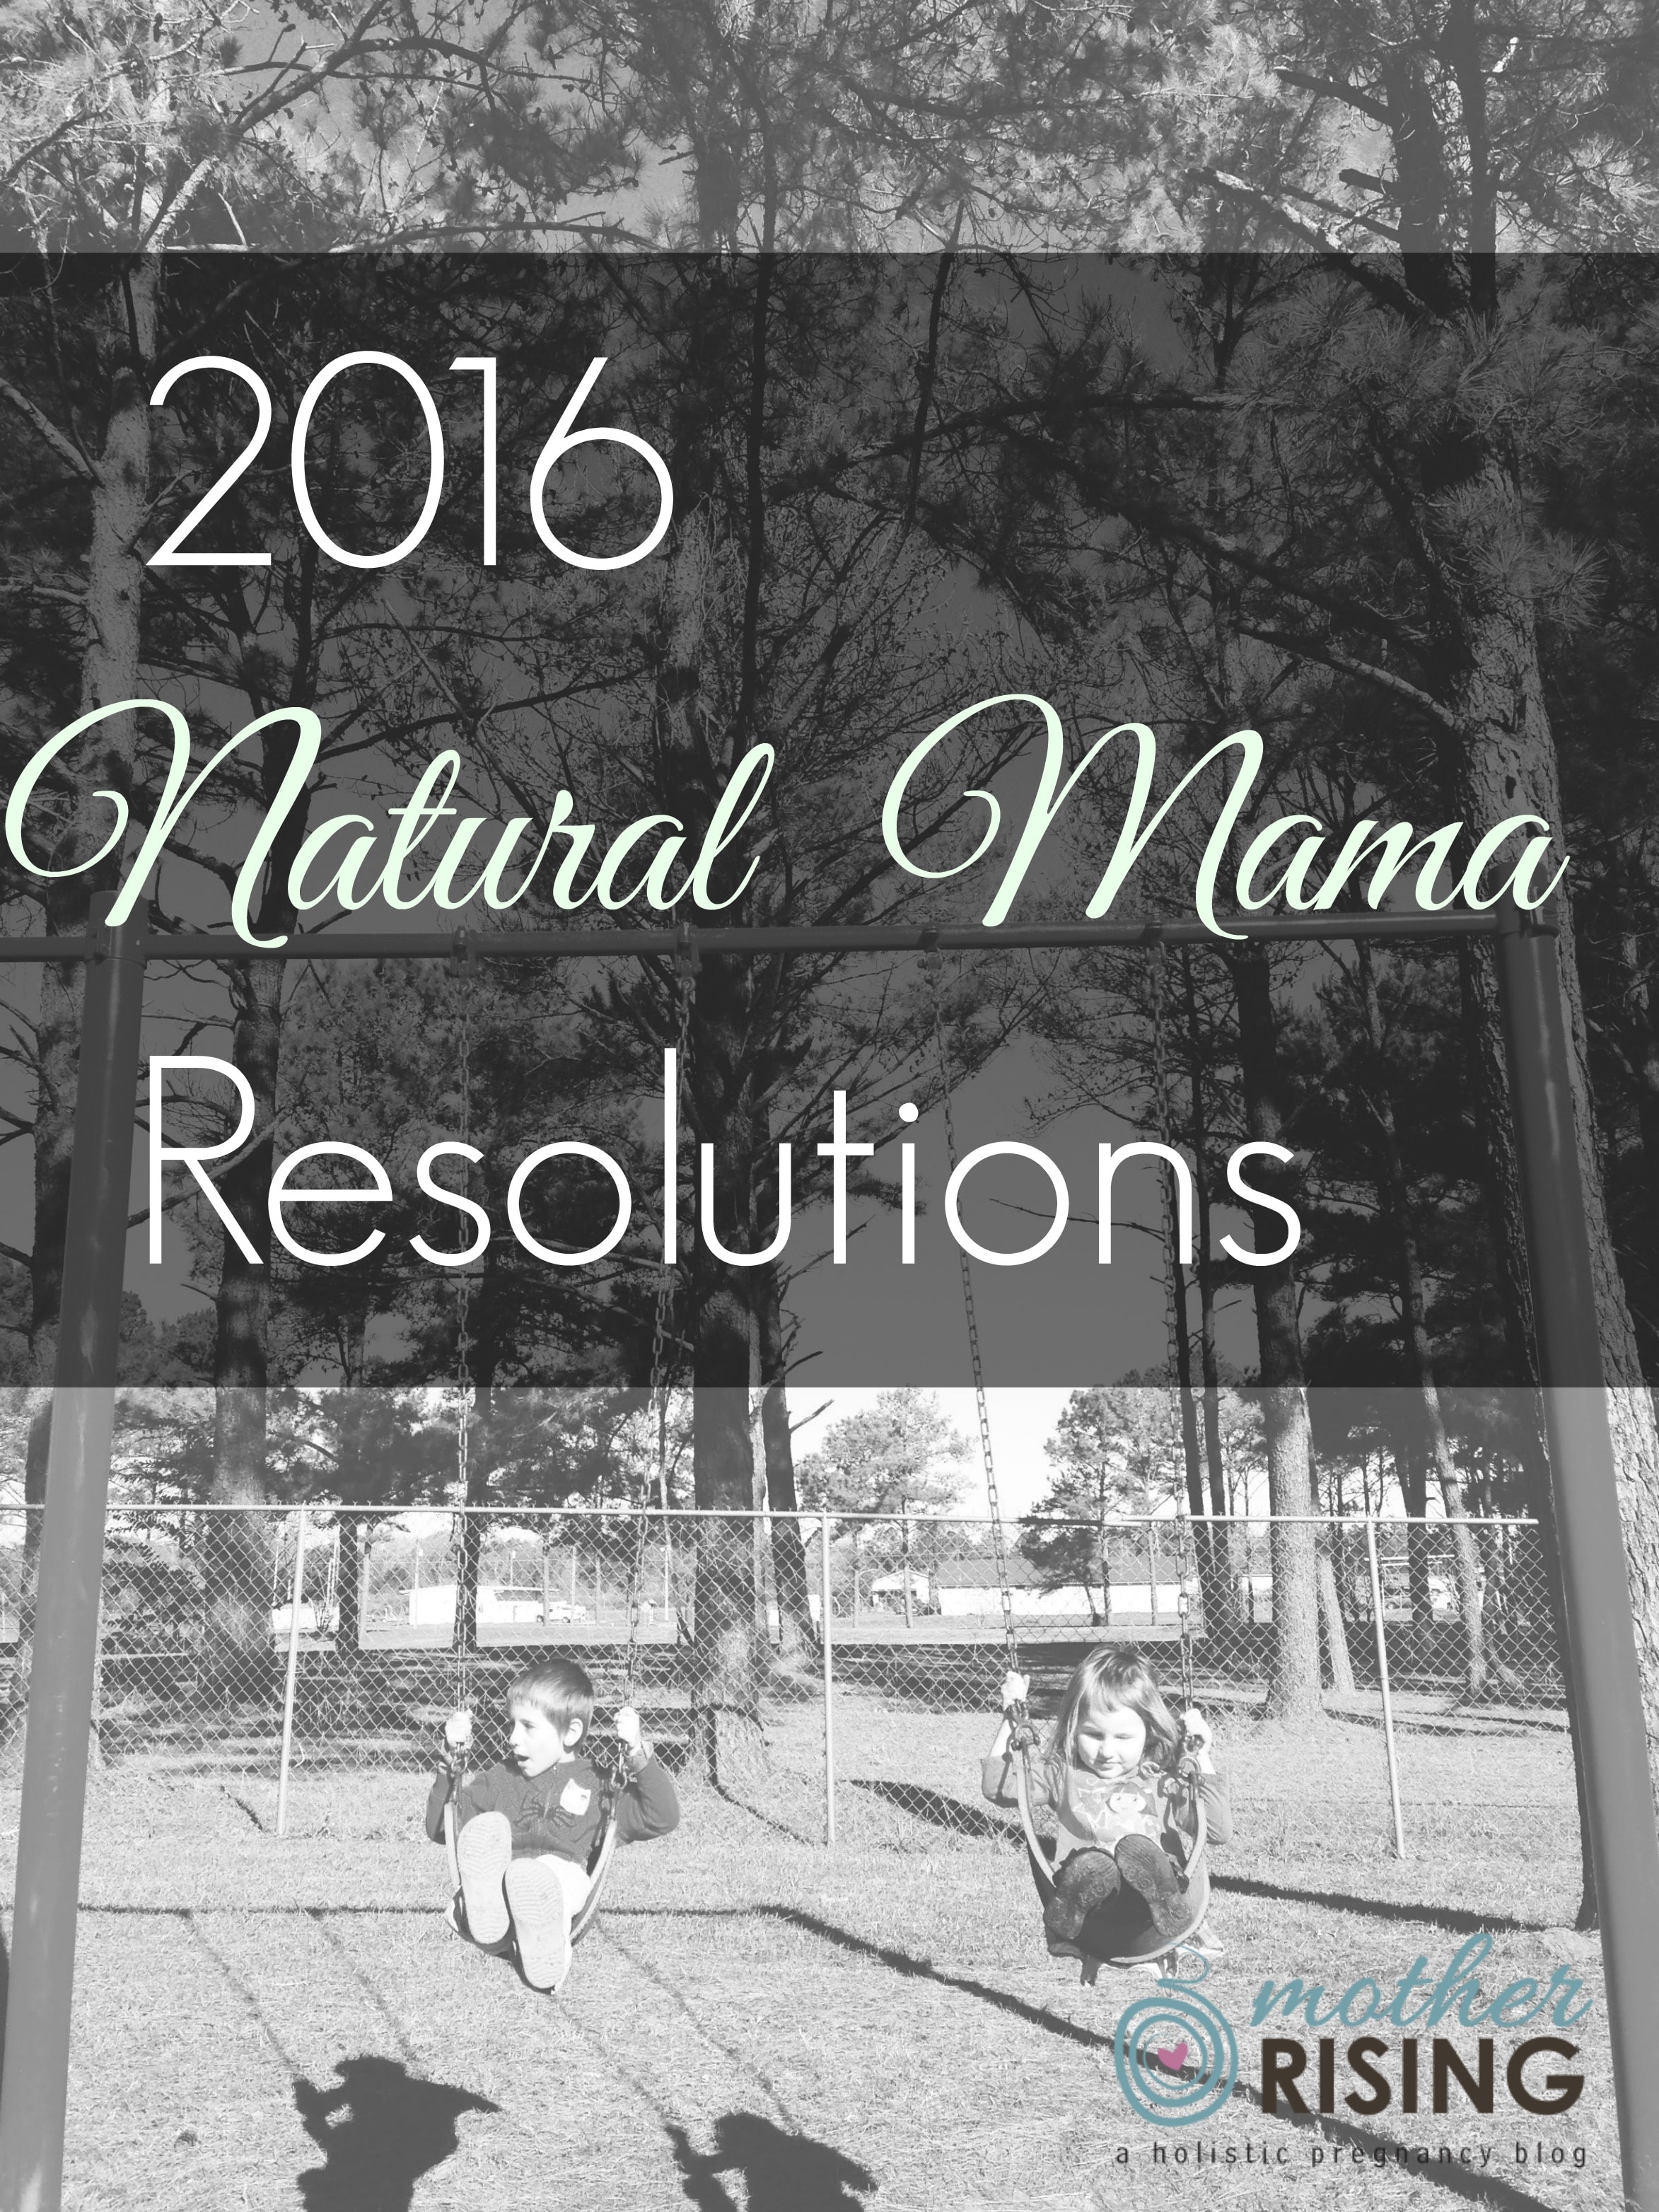 I have decided that this year I want to do something fun and different. This year I'm making Natural Mama Resolutions that spark joy... Marie Kondo style.